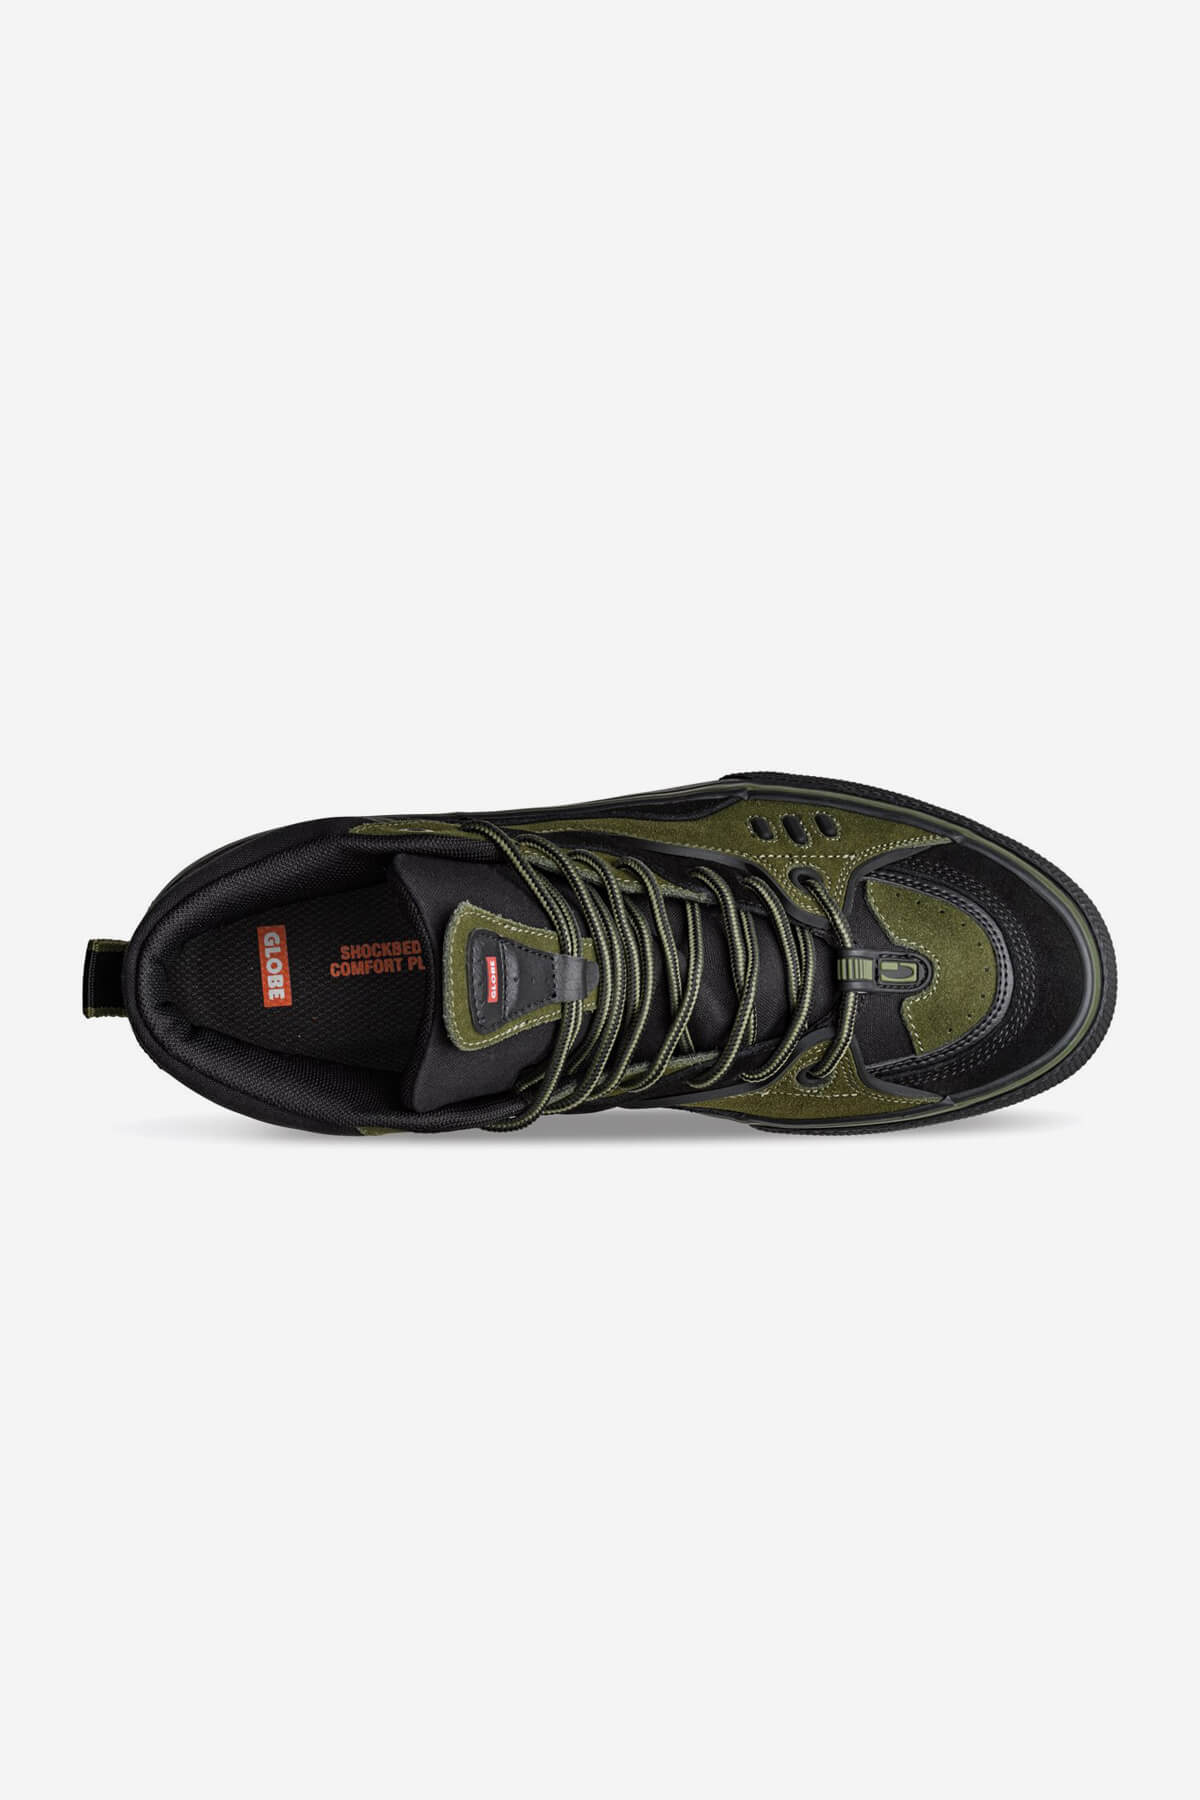 Globe Mid shoes Dimension skate shoes in Black/Moss/Summit